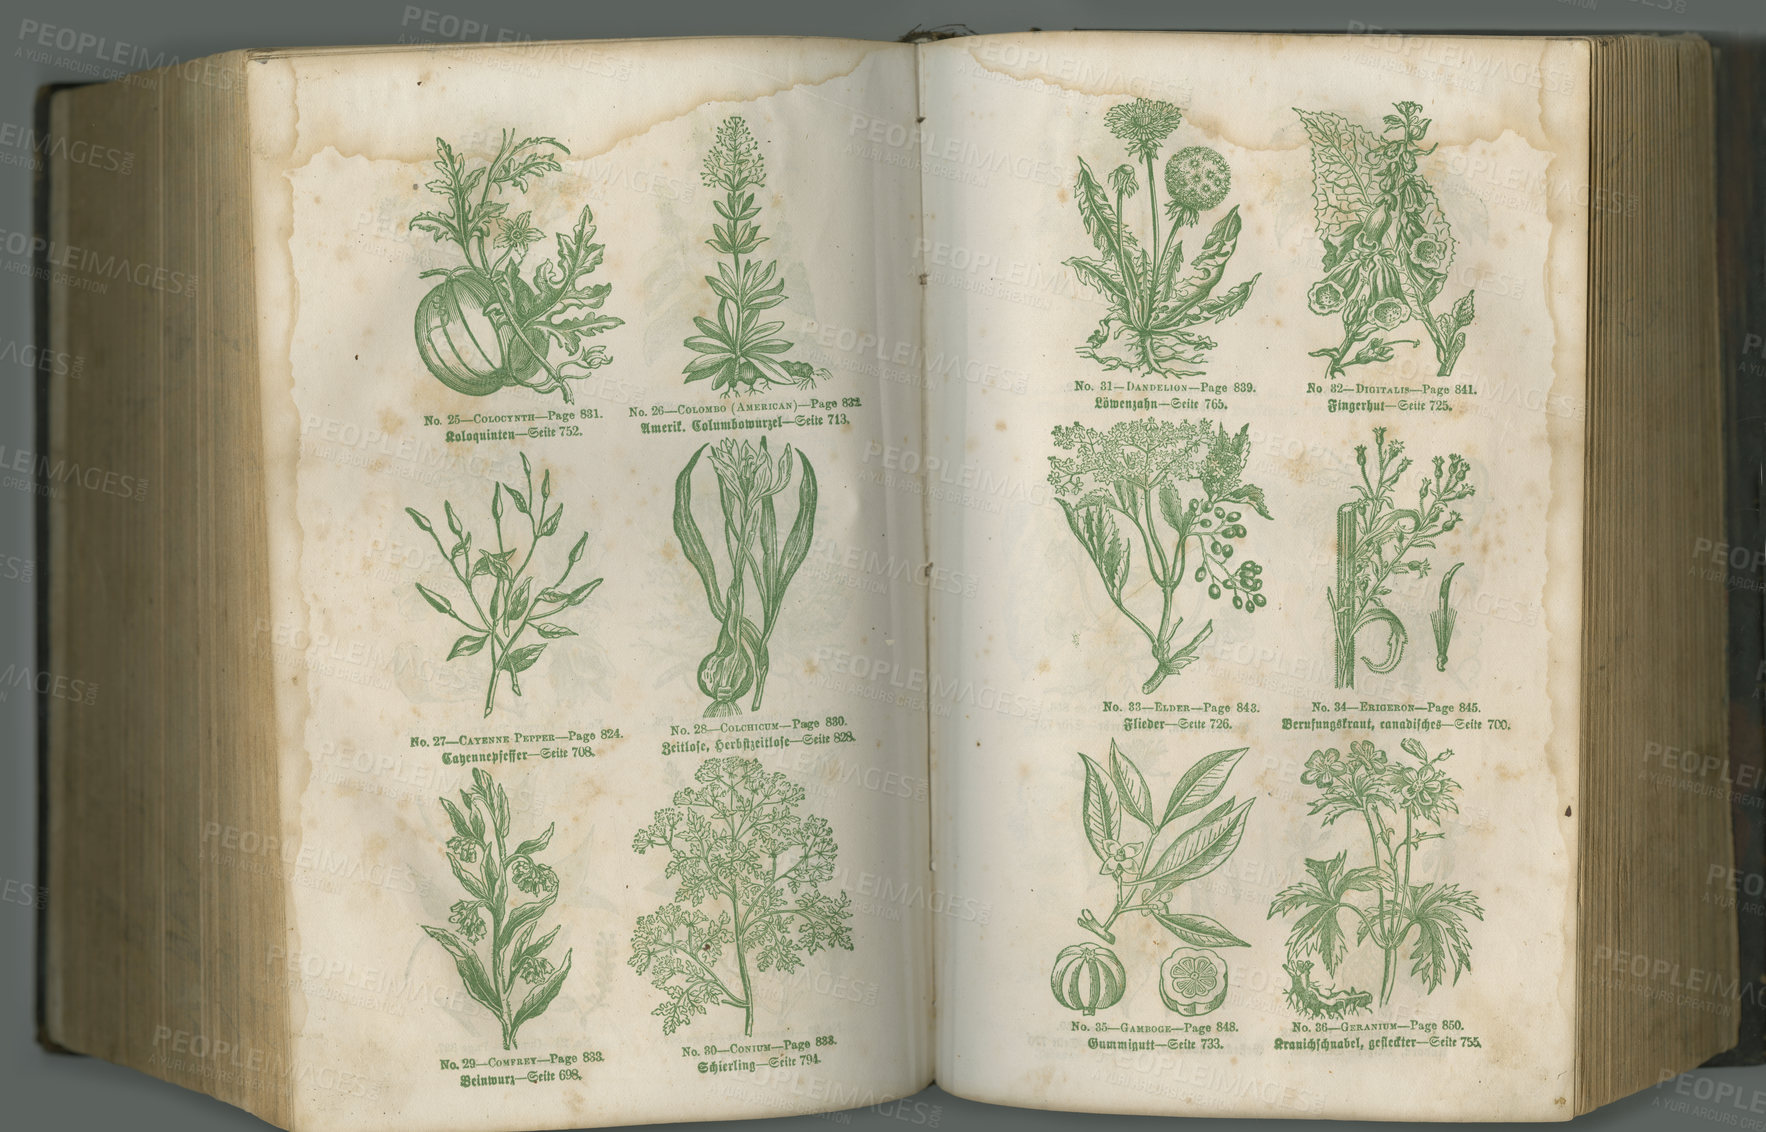 Buy stock photo Old book, plants and herbs in study for biology, medical or ancient vintage pages against studio background. Historical novel, botanical journal or illustration of natural medieval remedy or cure